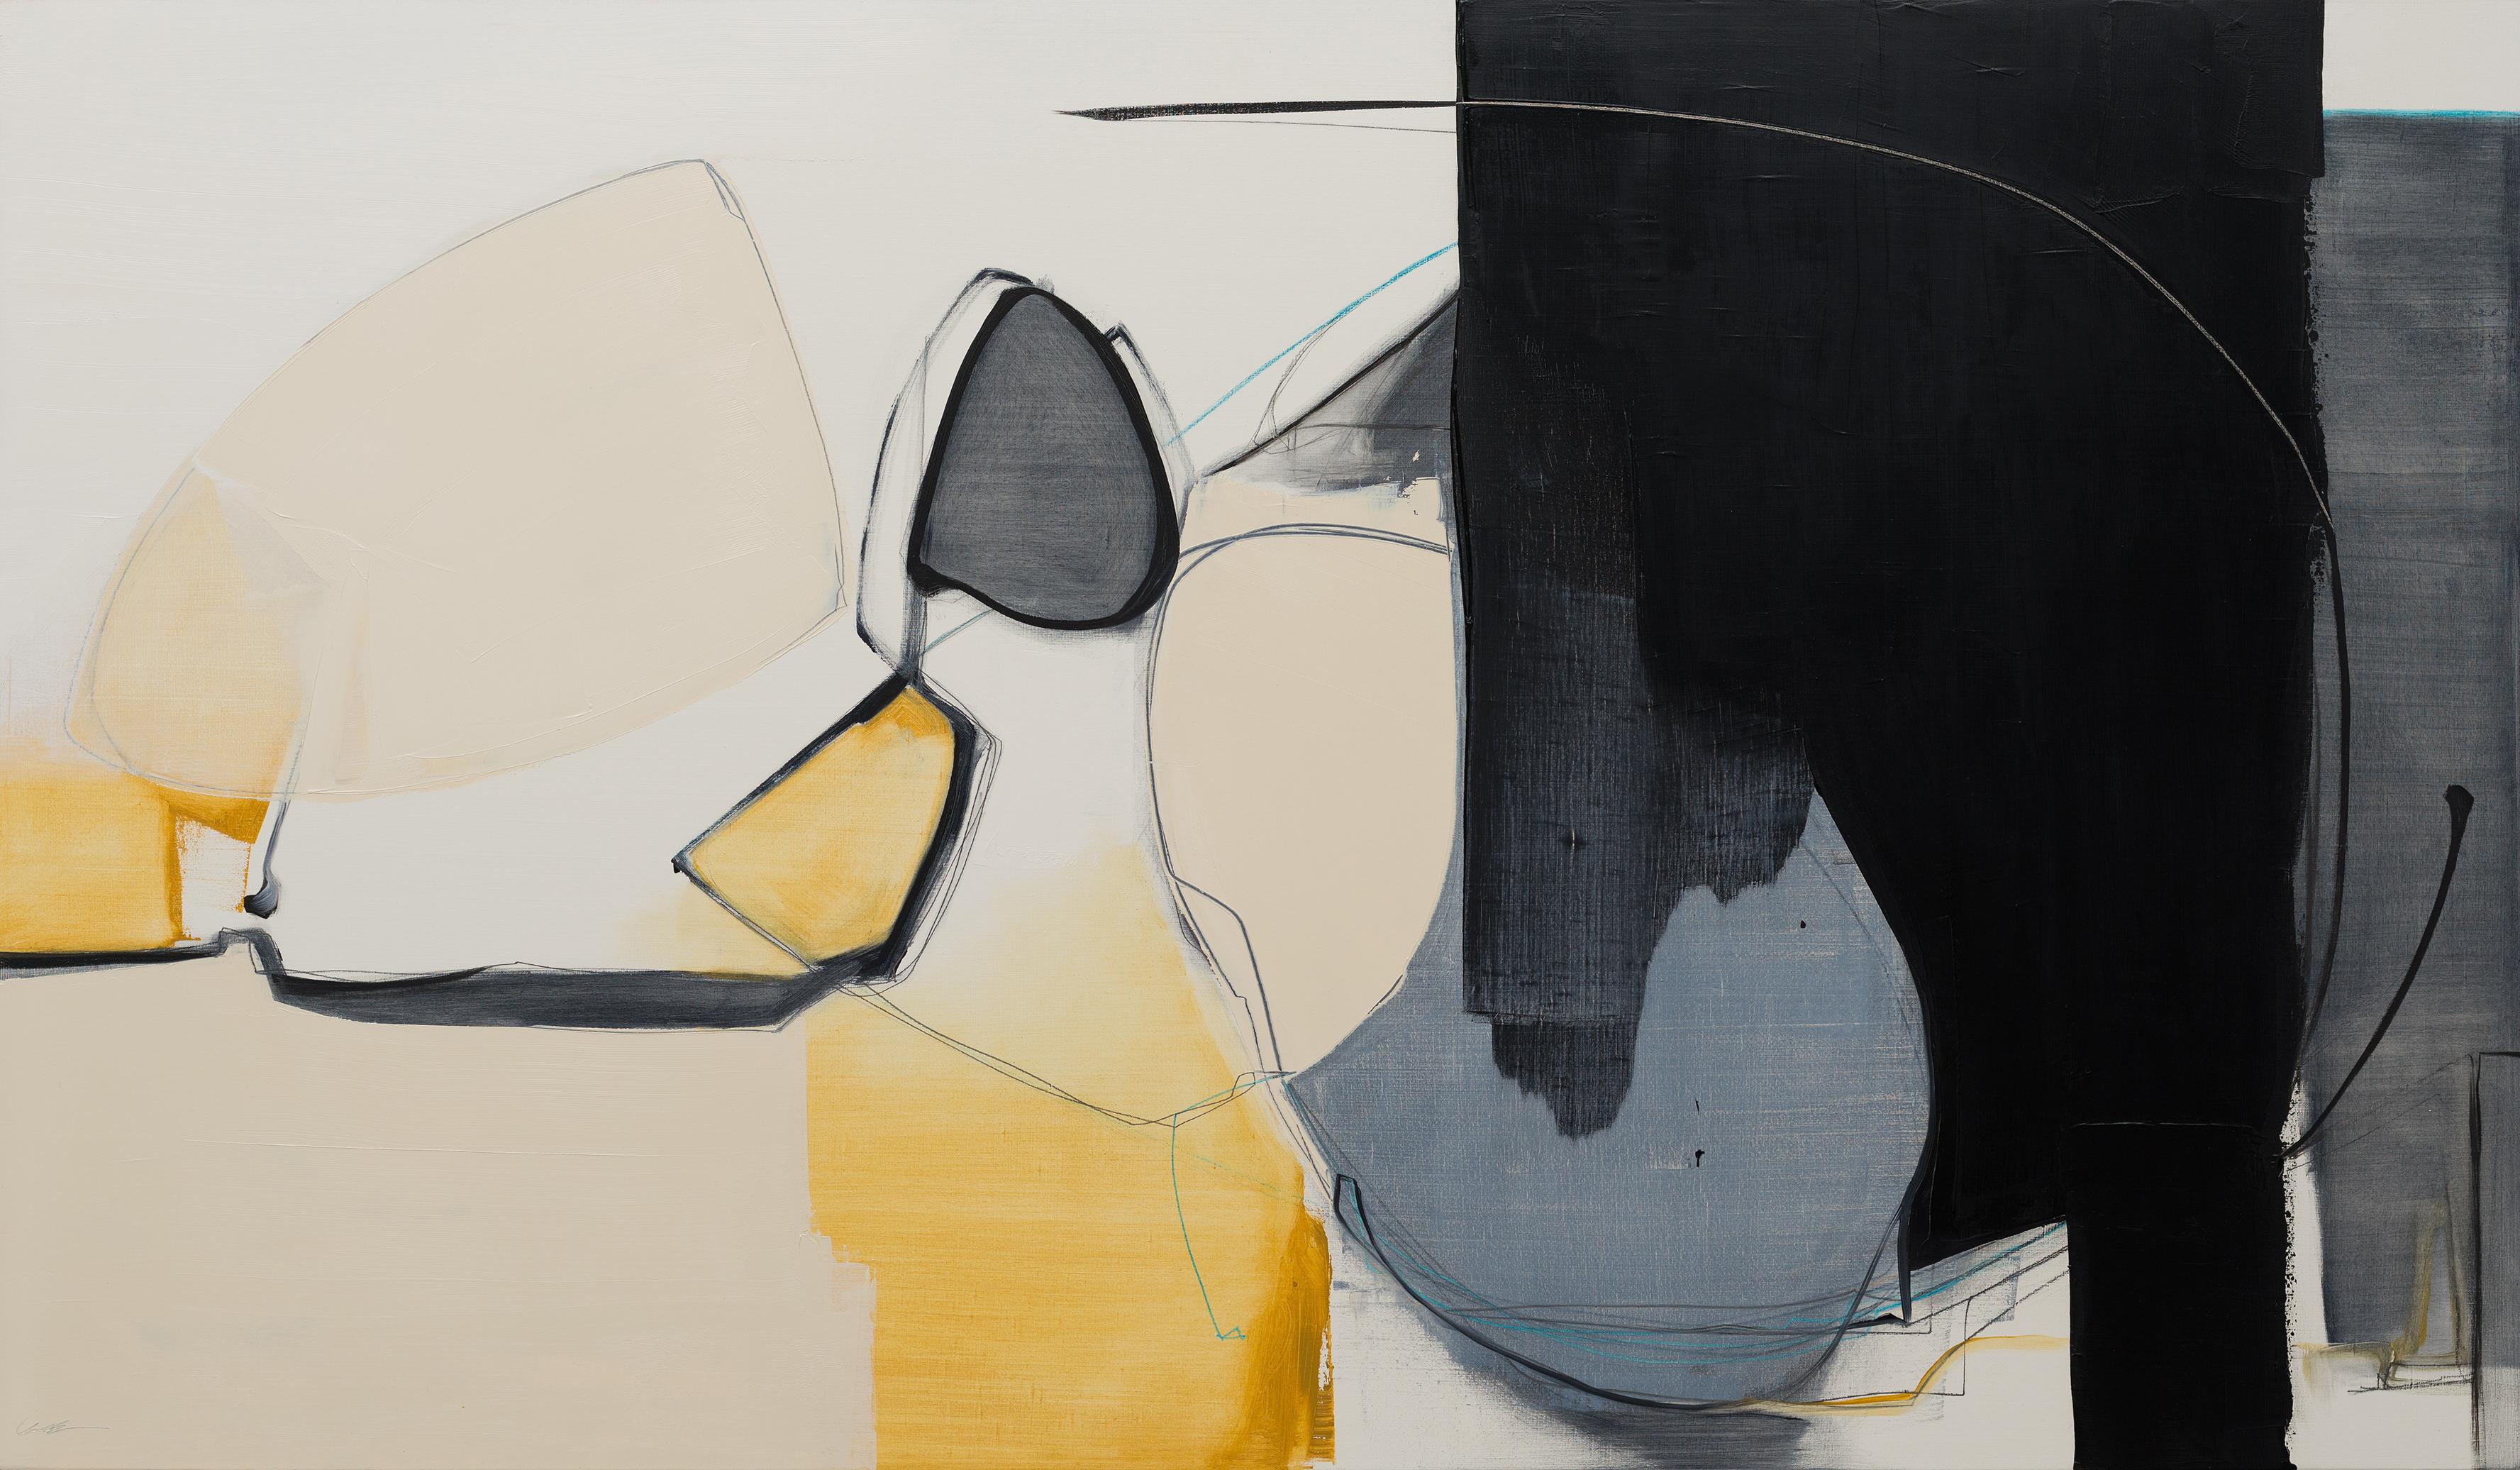 Rose Umerlik Abstract Painting - Rushing,  Abstract, Oil, Graphite, Wood Panel, Gray, Yellow, Black, White